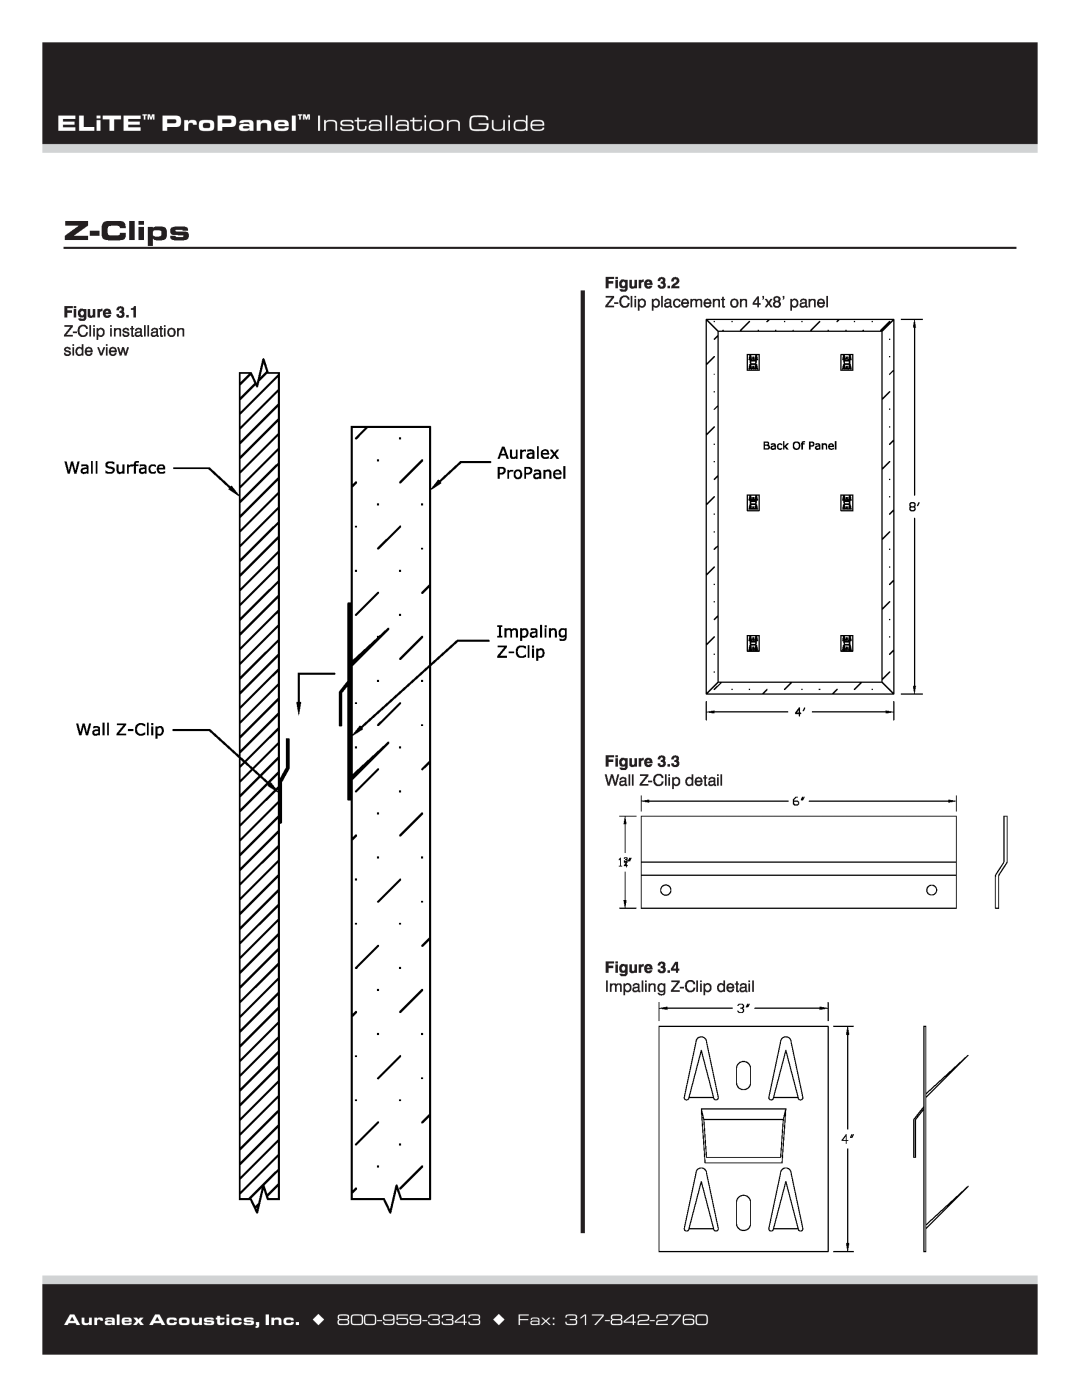 Auralex Acoustics Panels Z-Clips, ELiTE ProPanel Installation Guide, 1 Z-Clipinstallation side view, Wall Z-Clipdetail 